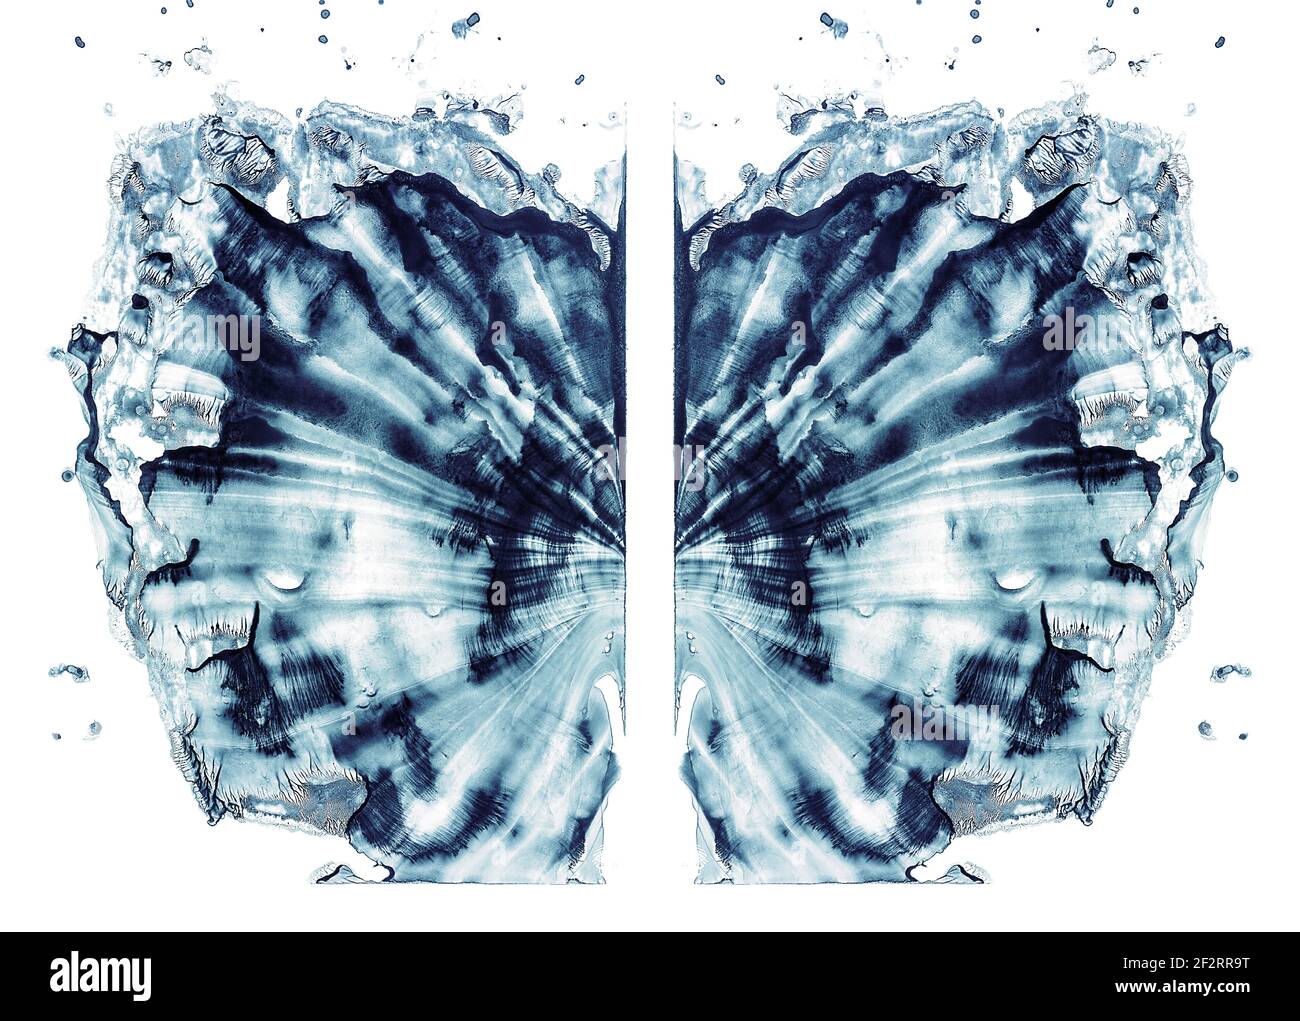 Rorschach test isolated on white illustration, random abstract blue background. Psycho diagnostic inkblot test. Stock Photo